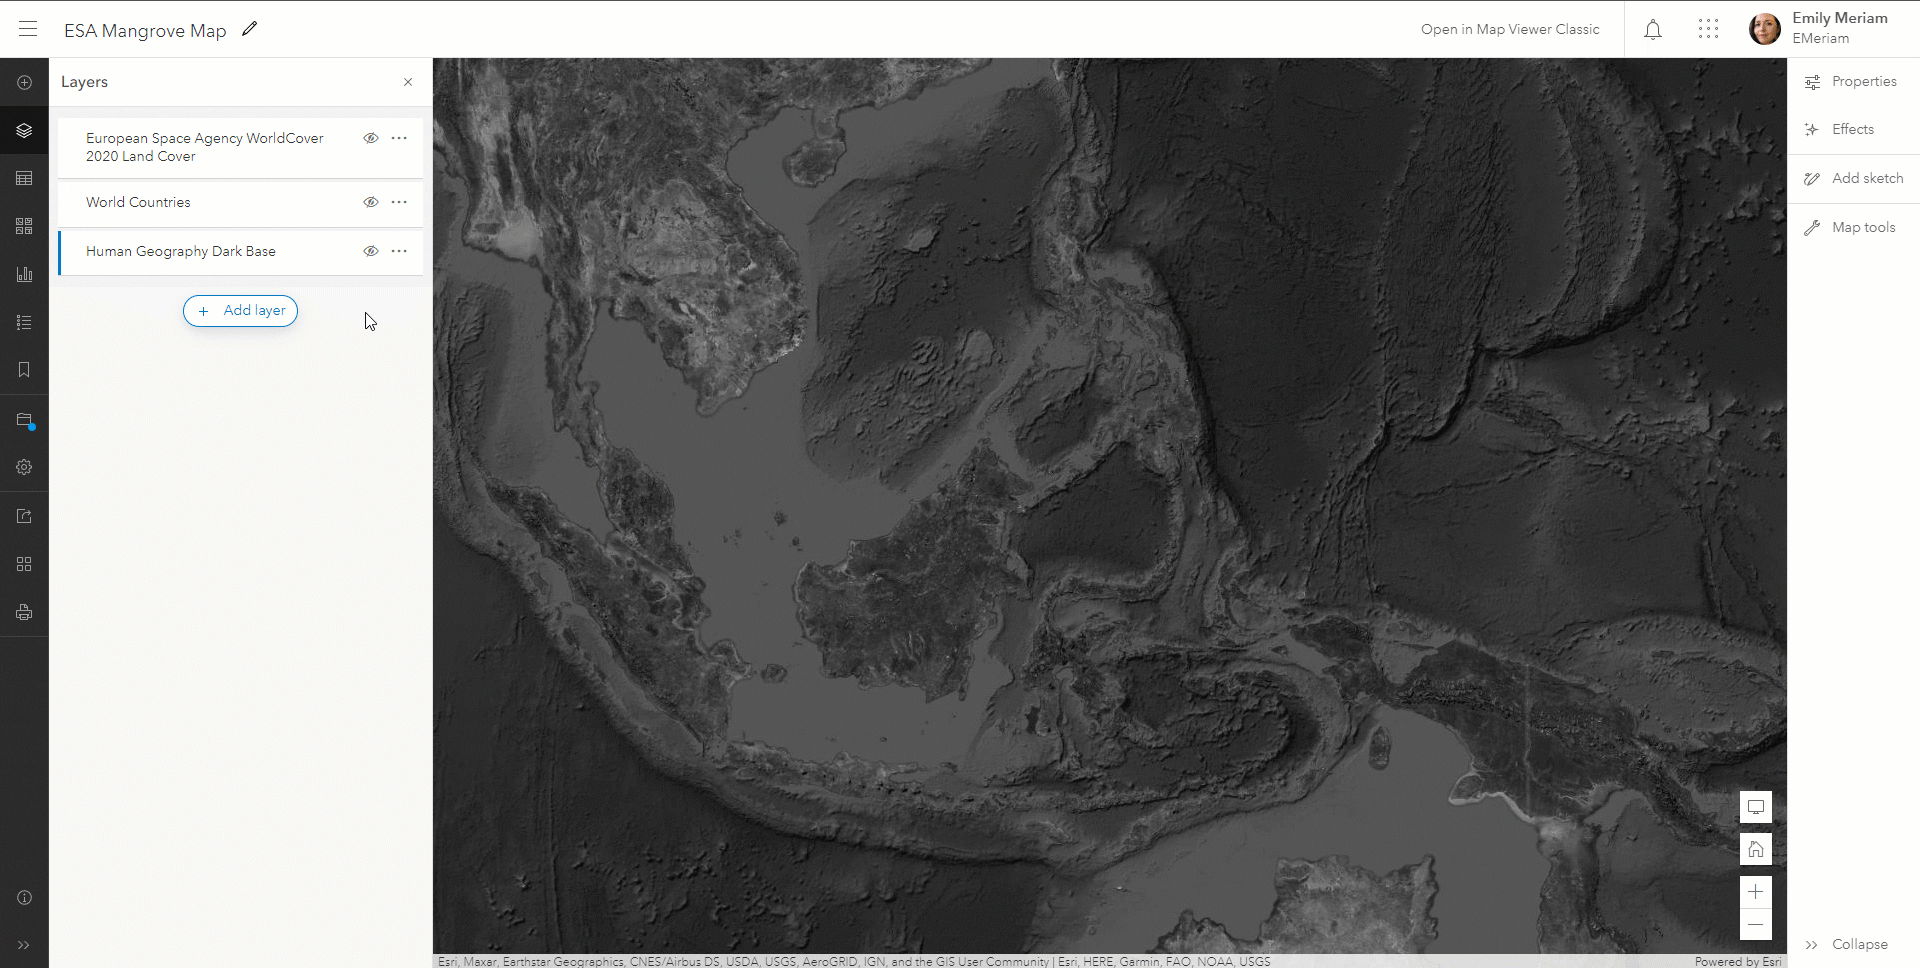 Animated gif showing how the second part of the basemap is set up.